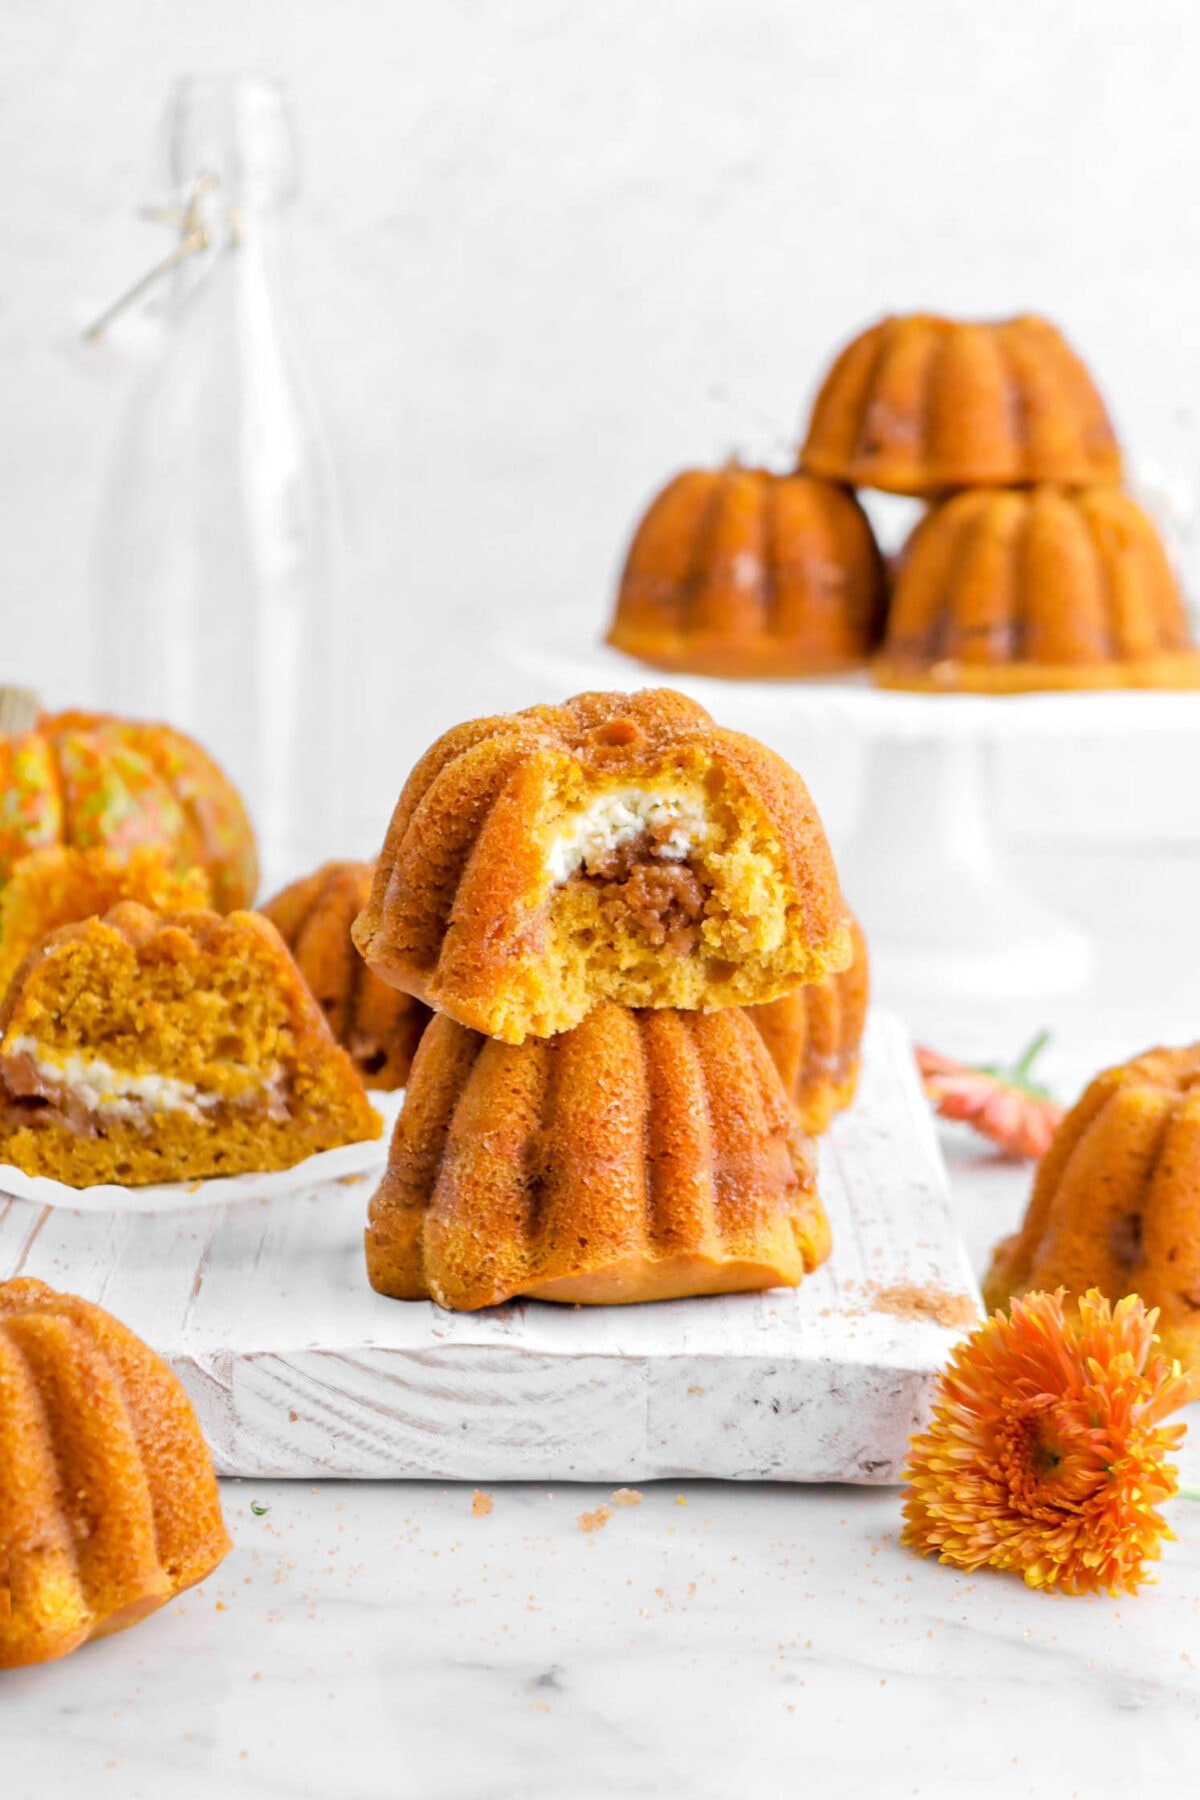 two stacked pumpkin cakes with one missing a bite, more pumpkin cakes behind, and an orange chrysanthemum.